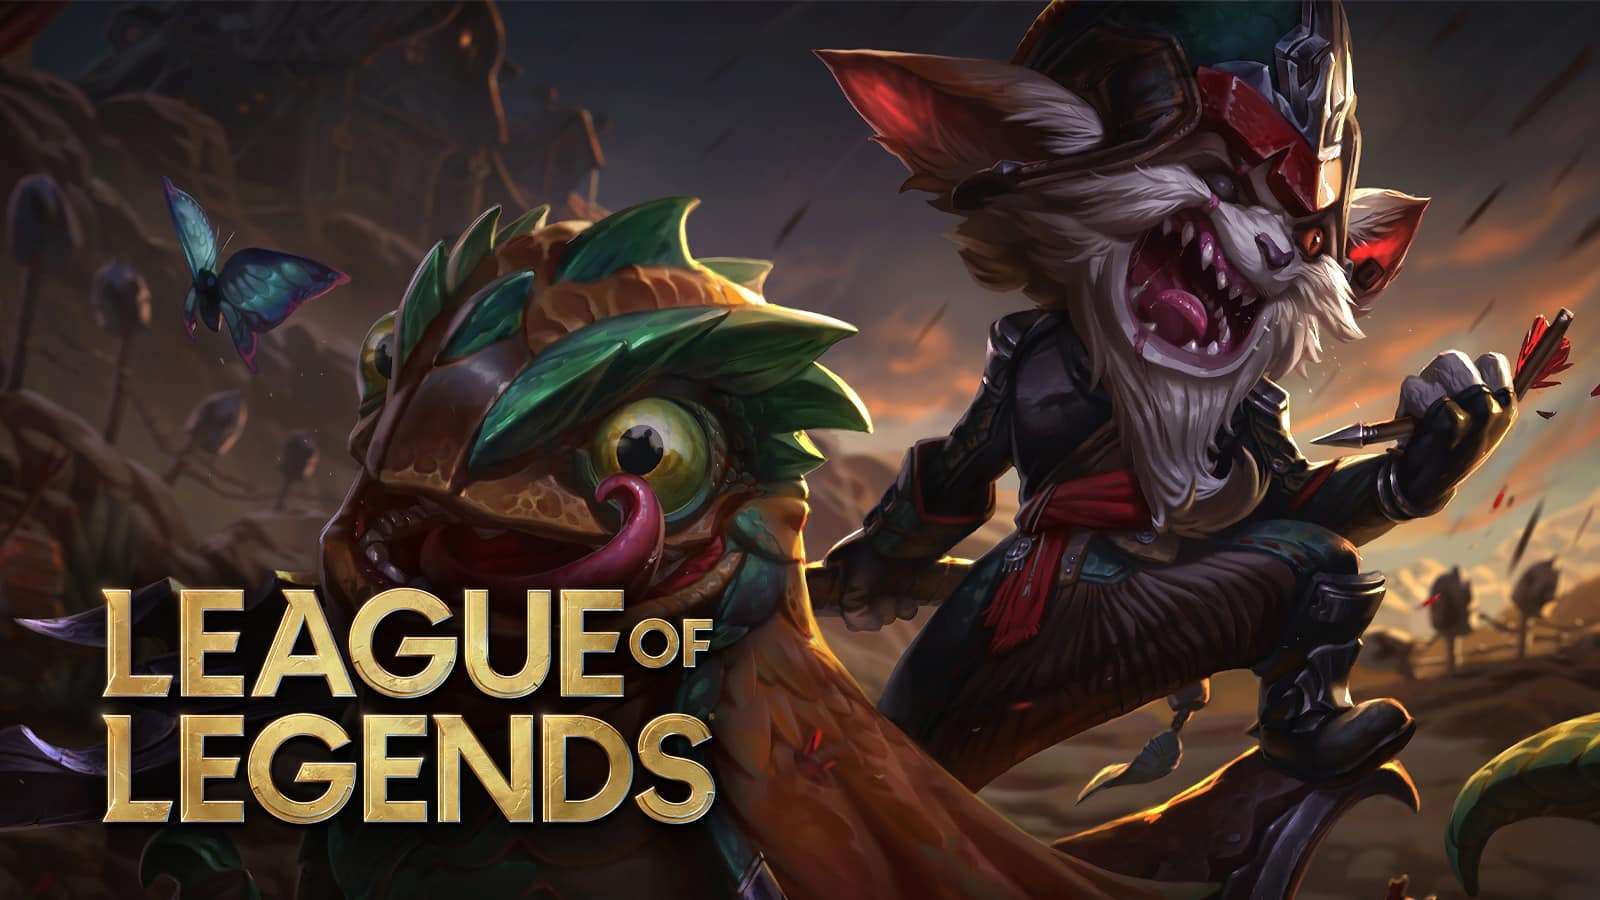 Kled in League of Legends